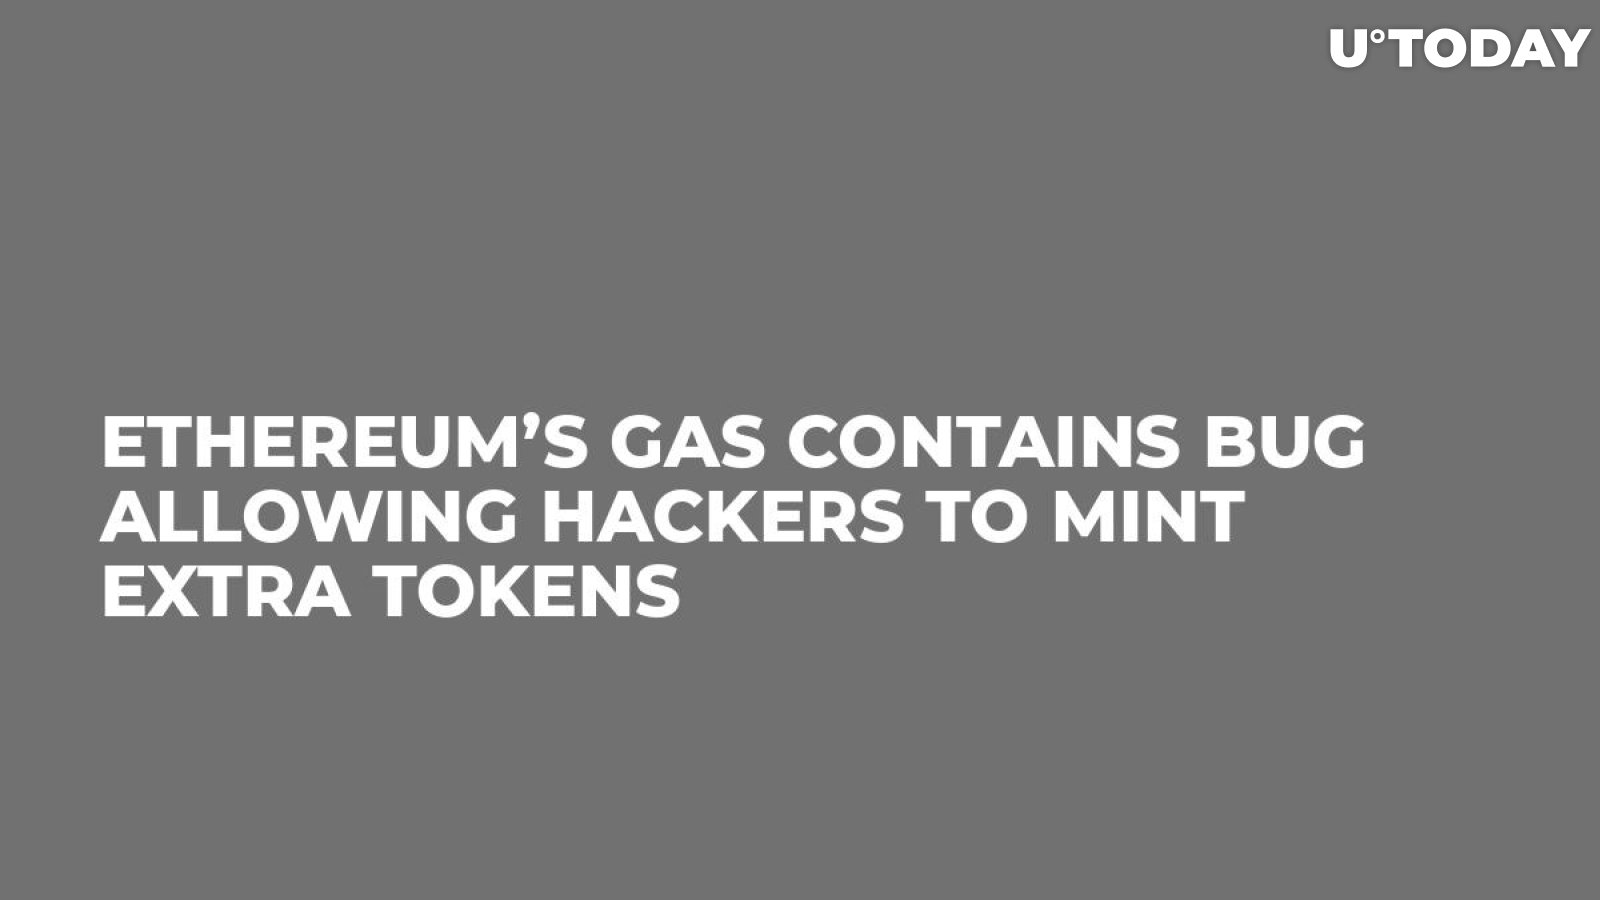 Ethereum’s Gas Contains Bug Allowing Hackers to Mint Extra Tokens